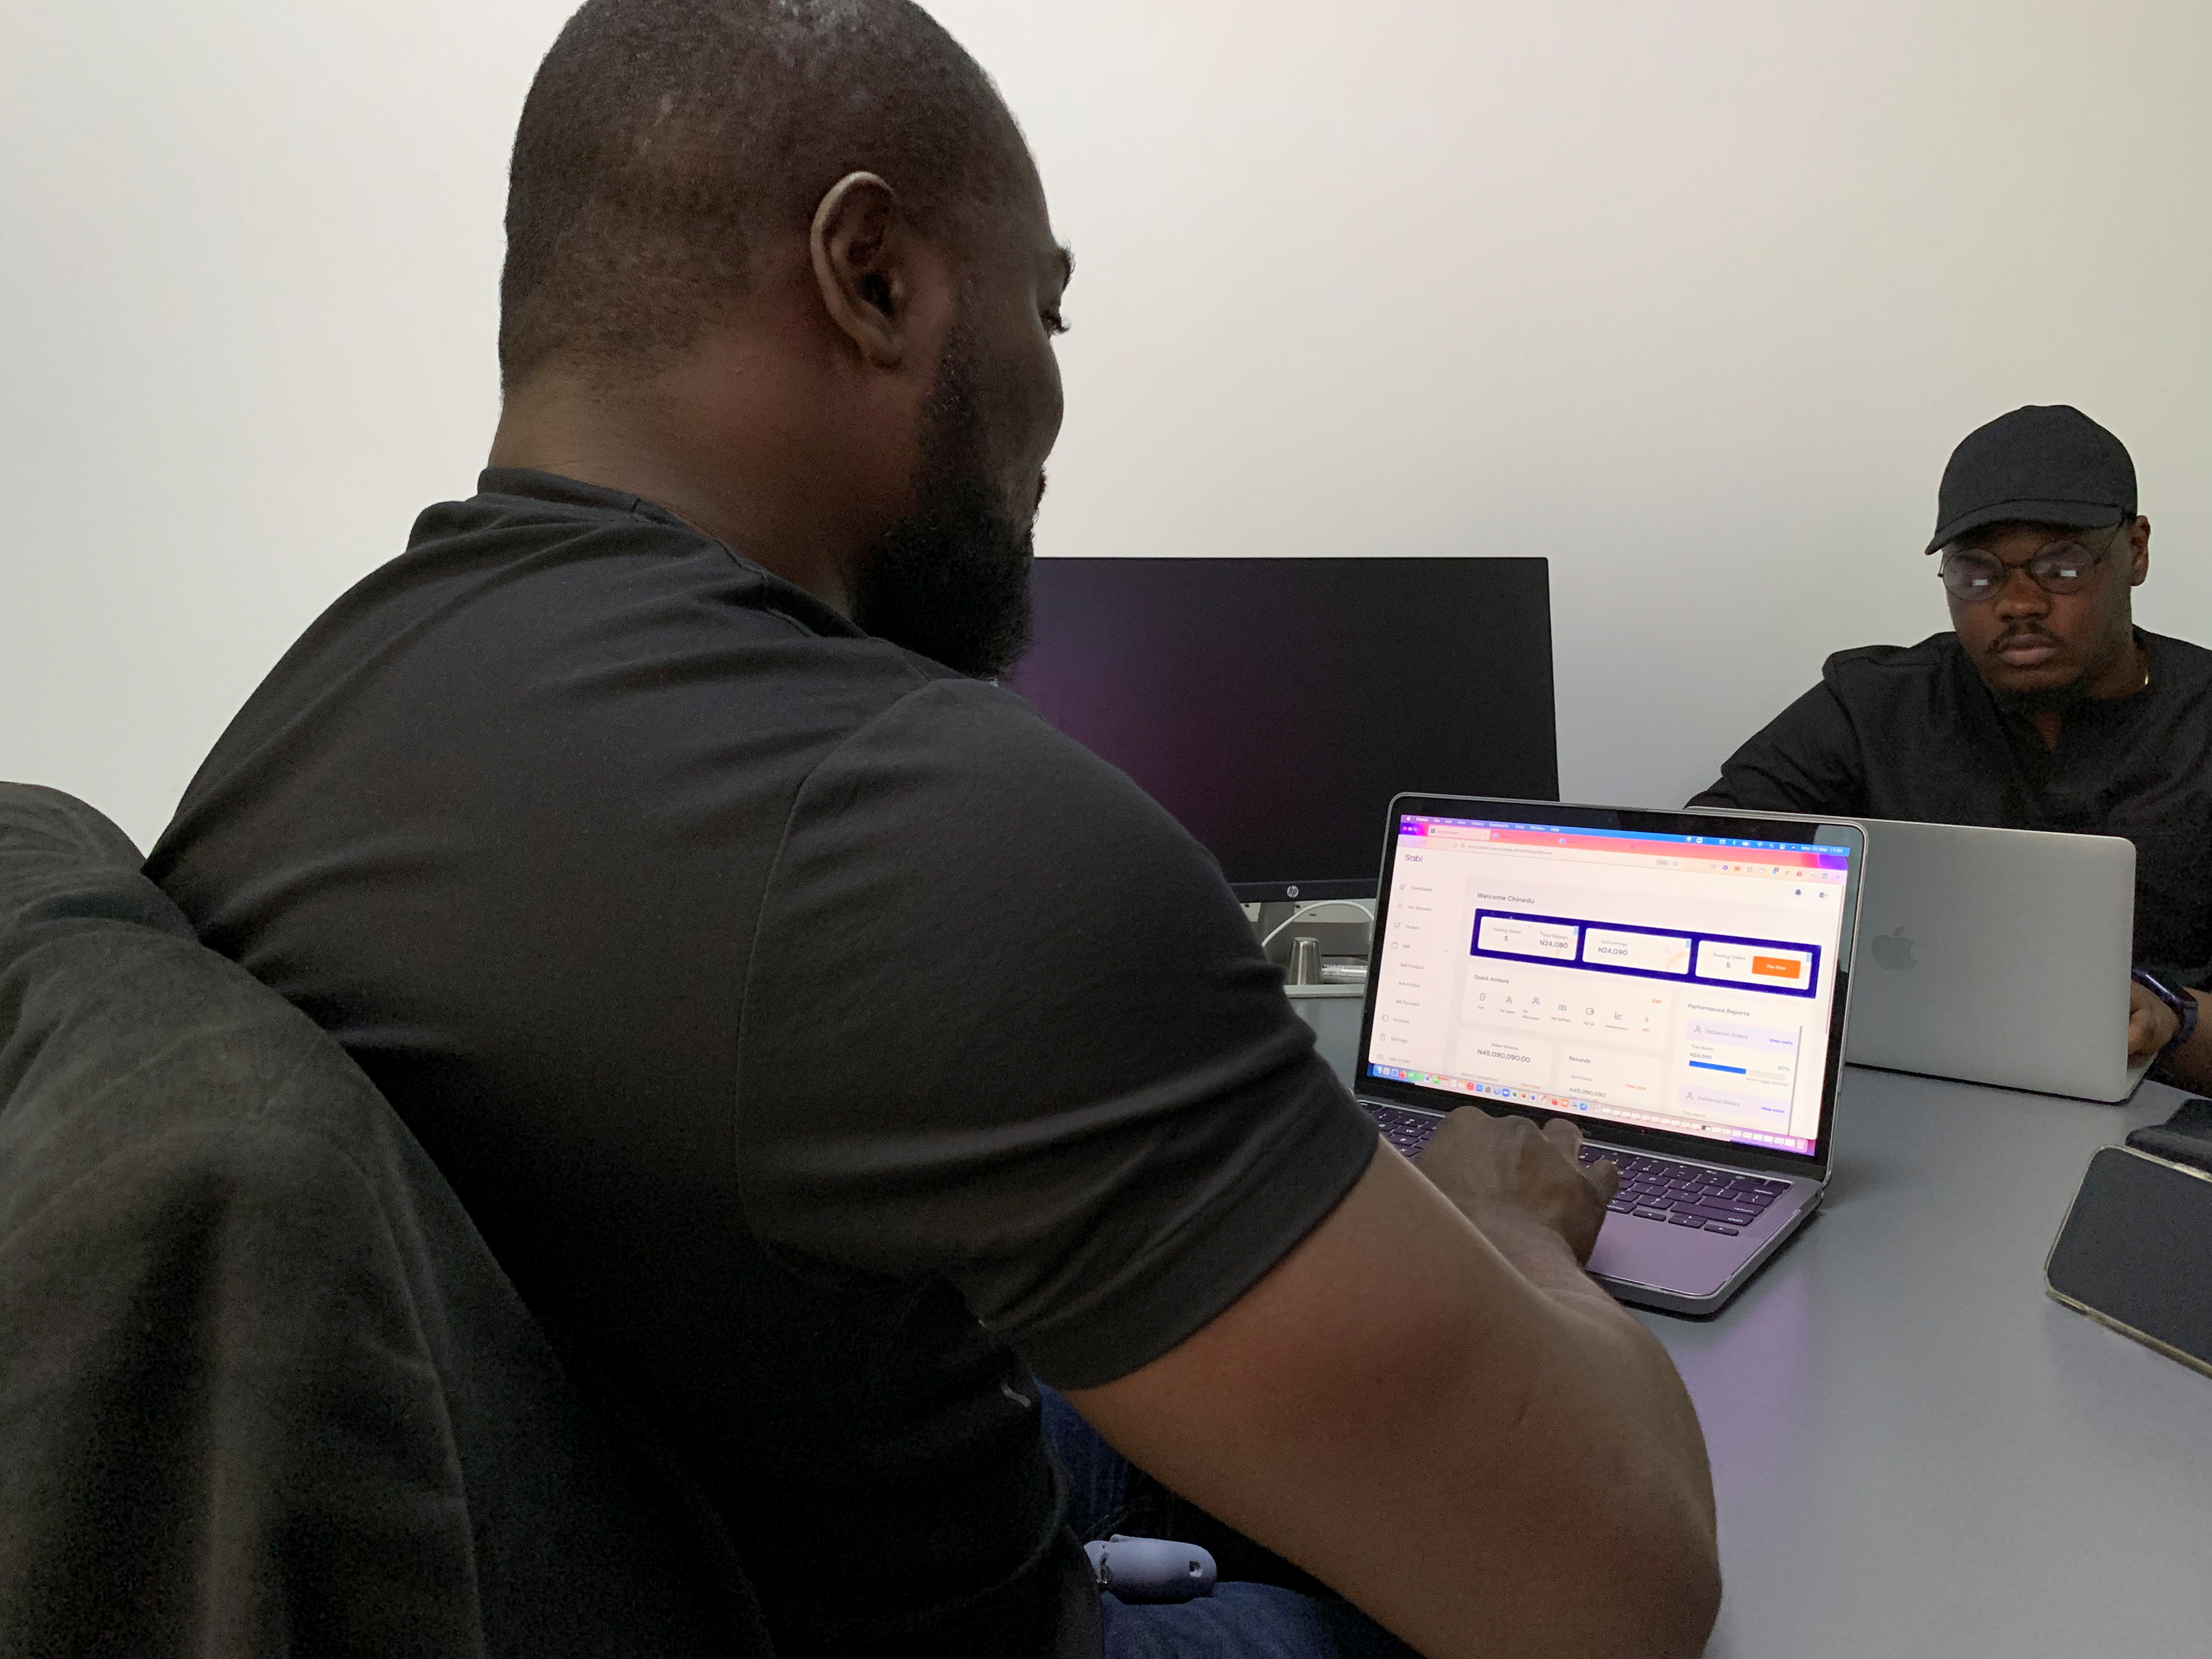 Staffs work on the backend of Sabi online groceries website at the office in Lagos